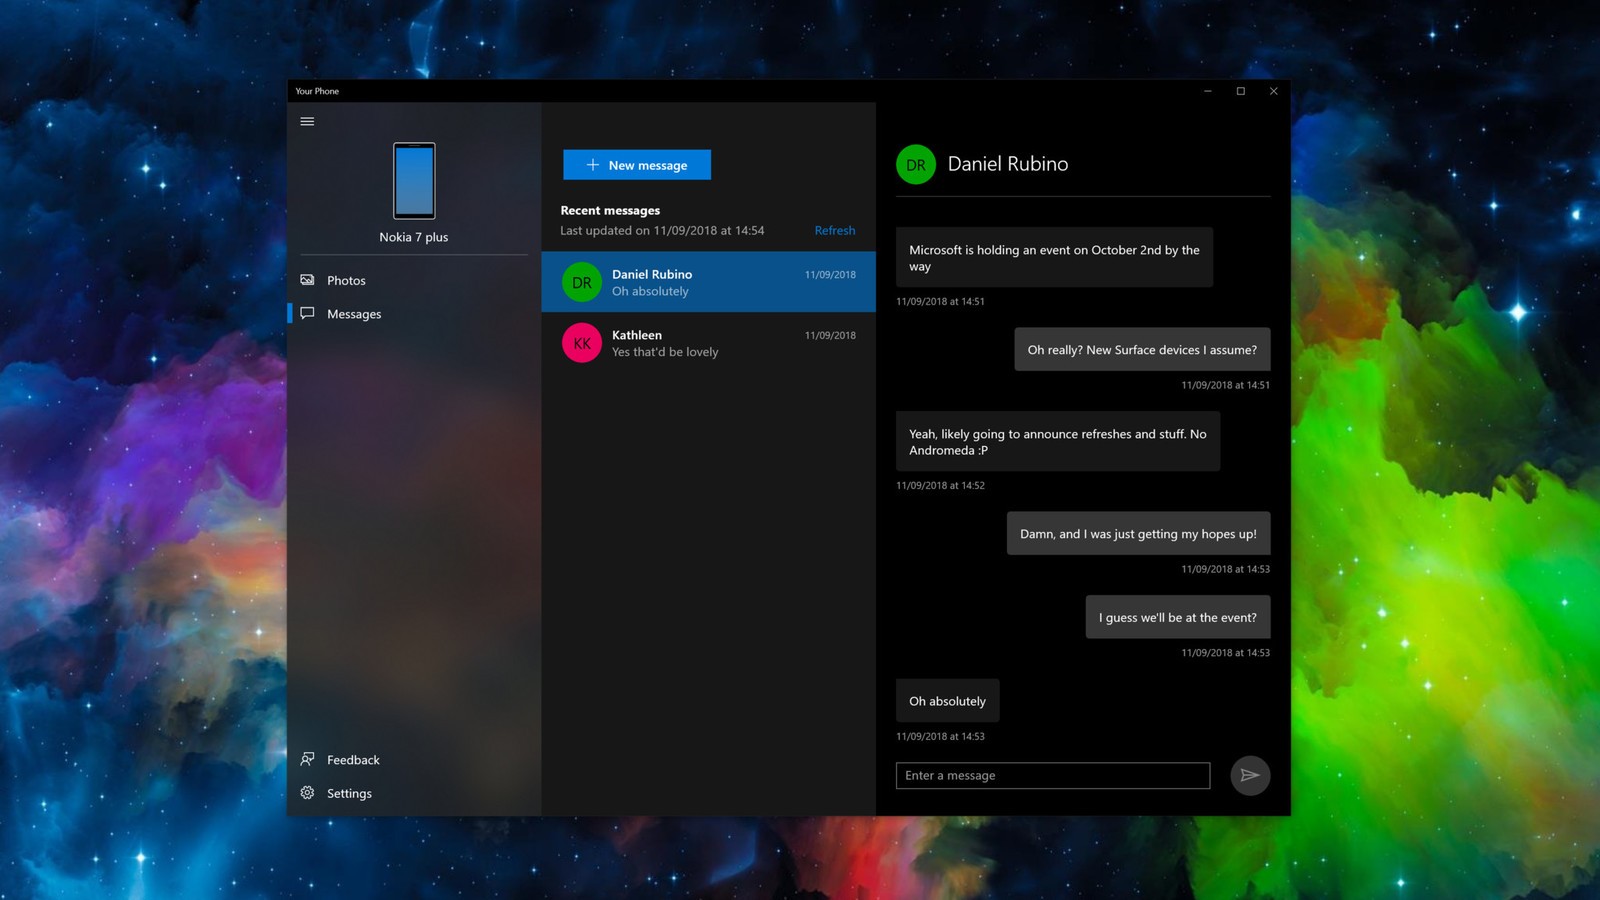 Windows 10’s new ‘Your Phone’ Android SMS syncs messages from your phone to PC